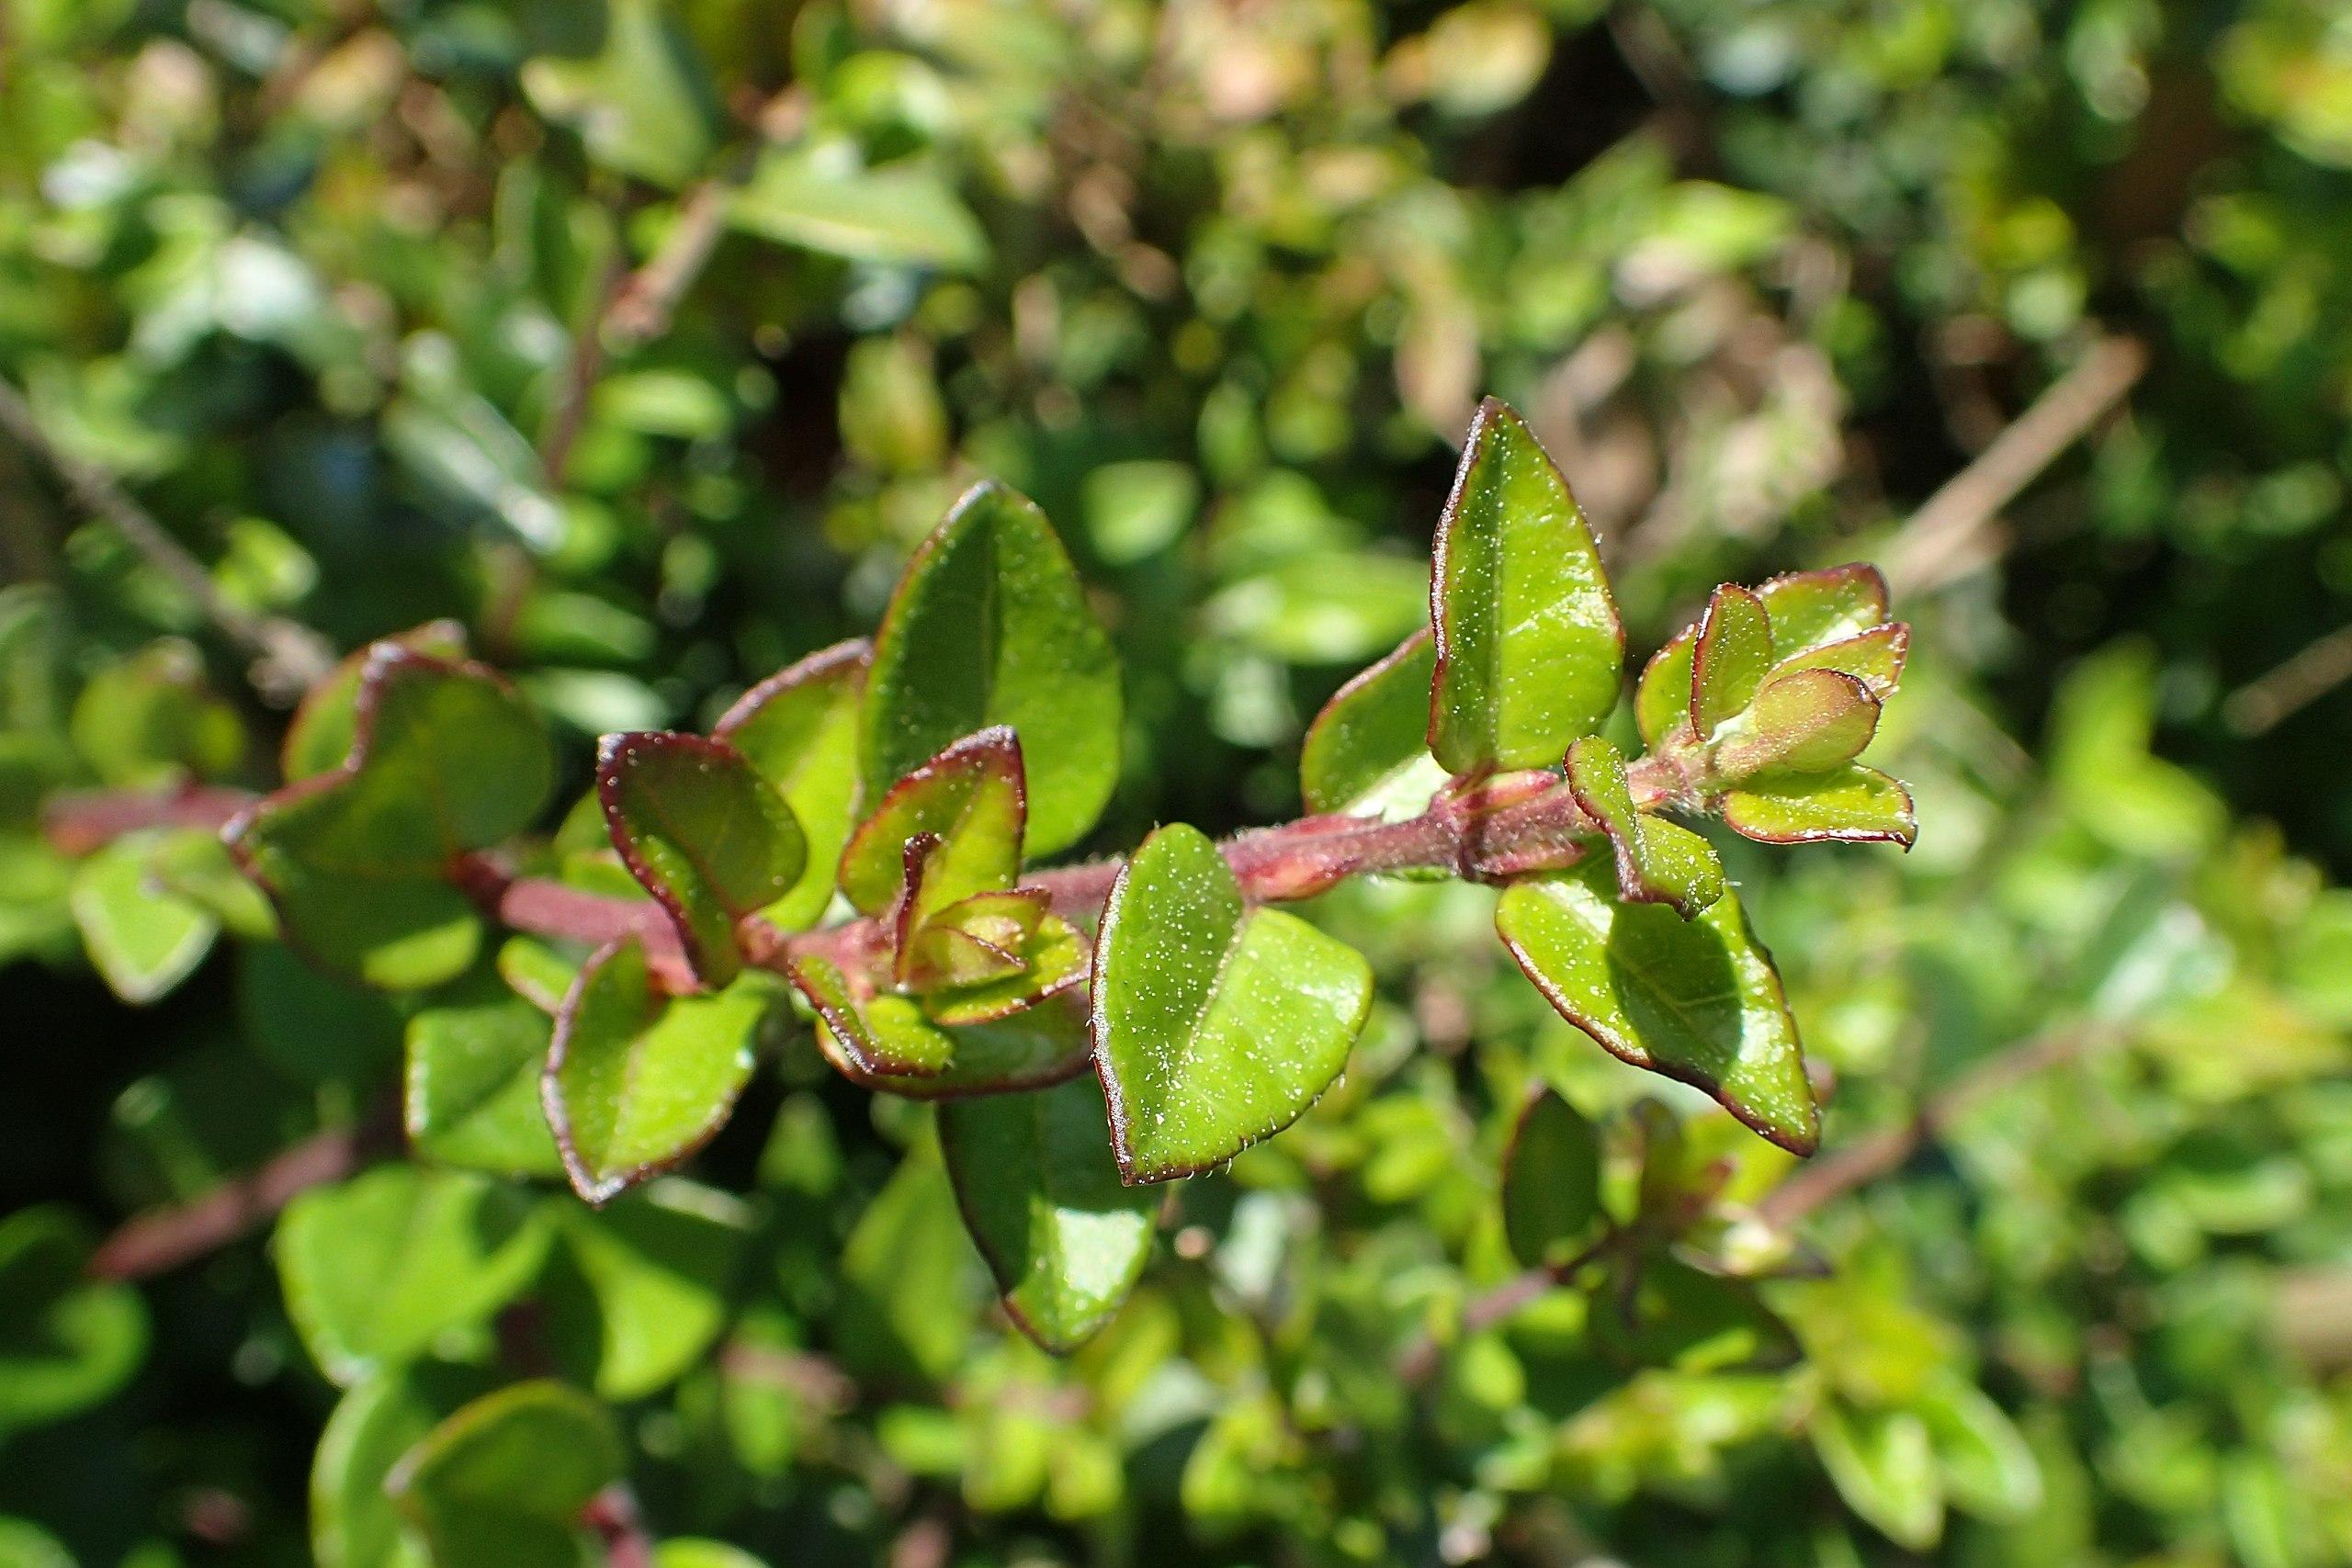 Green leaves with yellow midrib and veins,  burgundy stems and blades